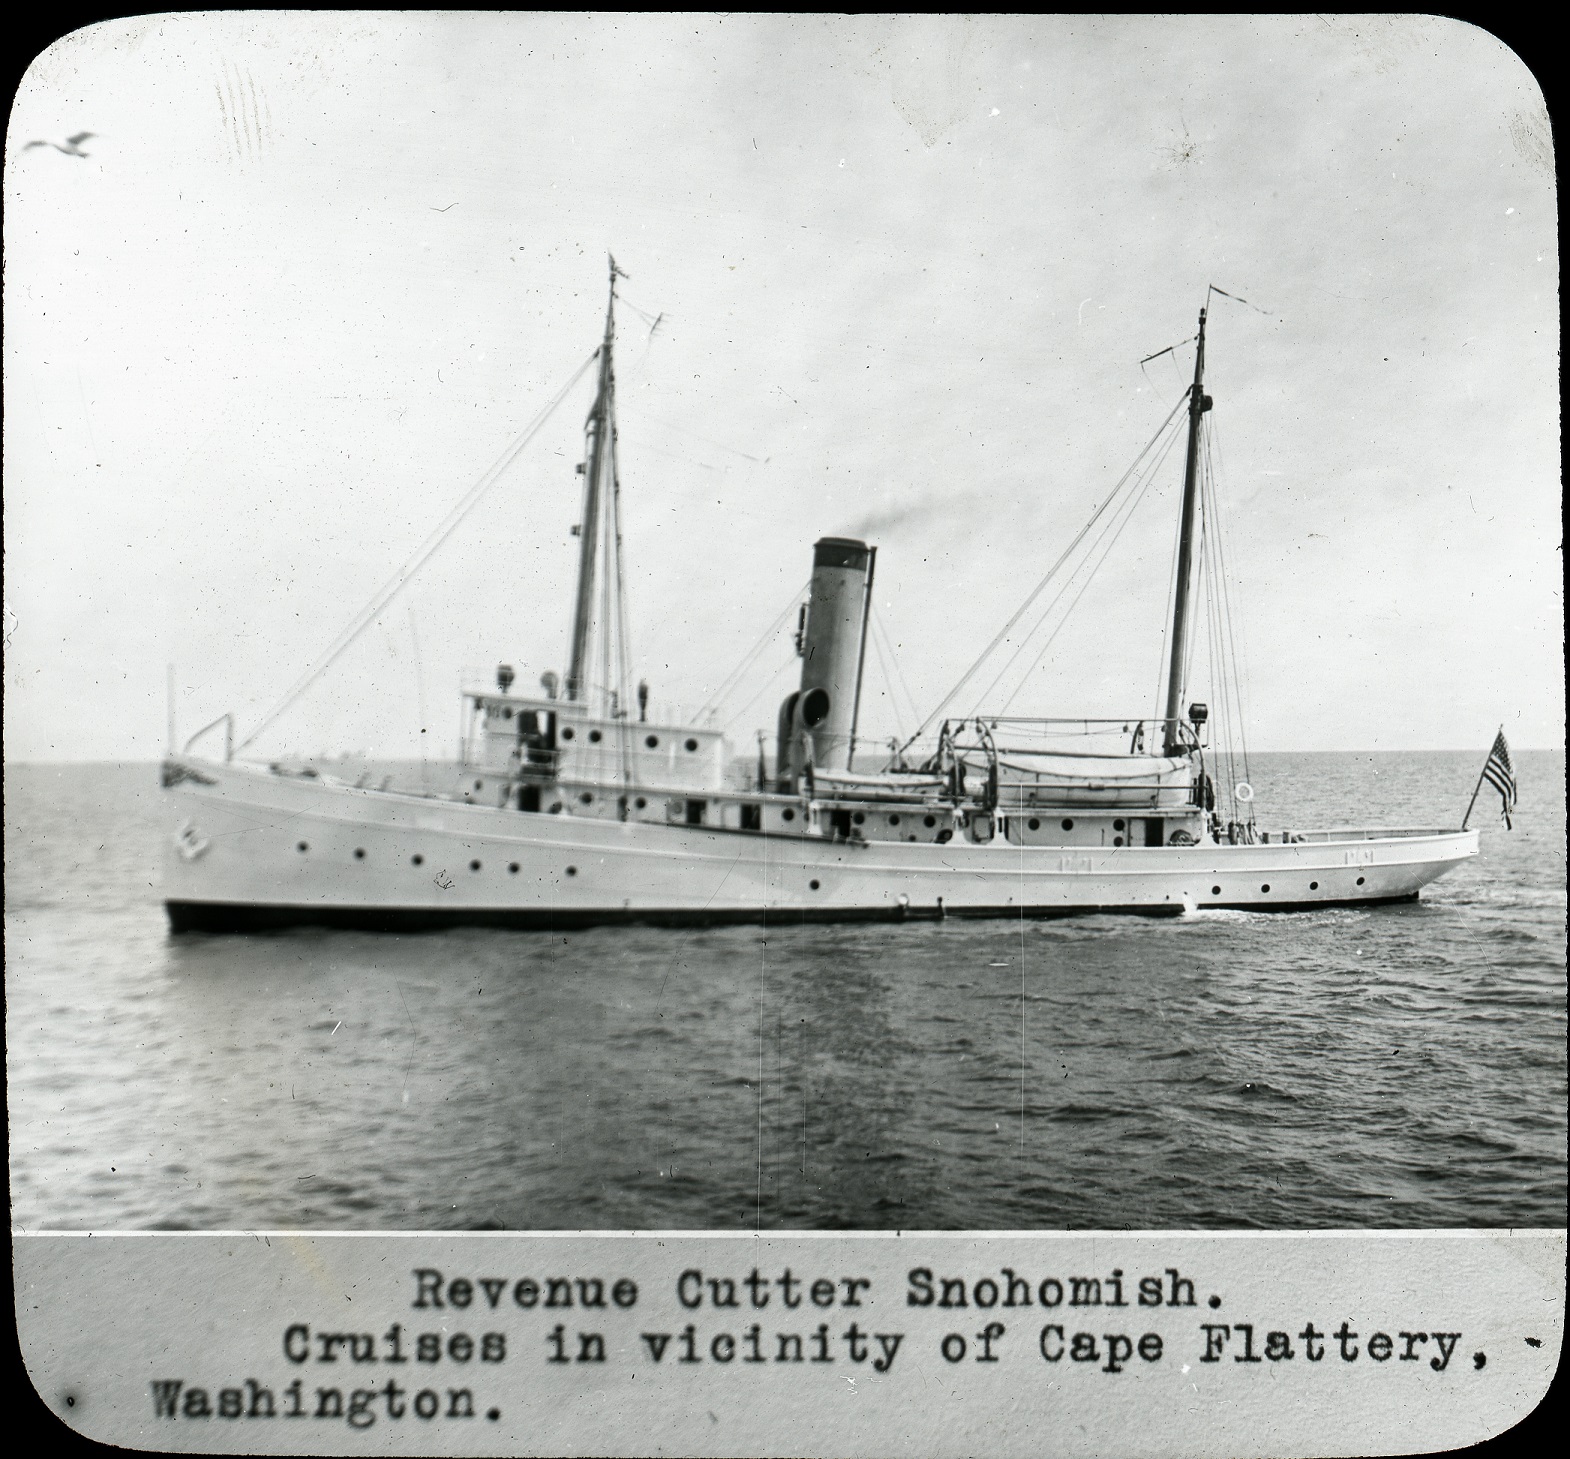 Profile image of Revenue Cutter Snohomish in 1909. (National Archives)